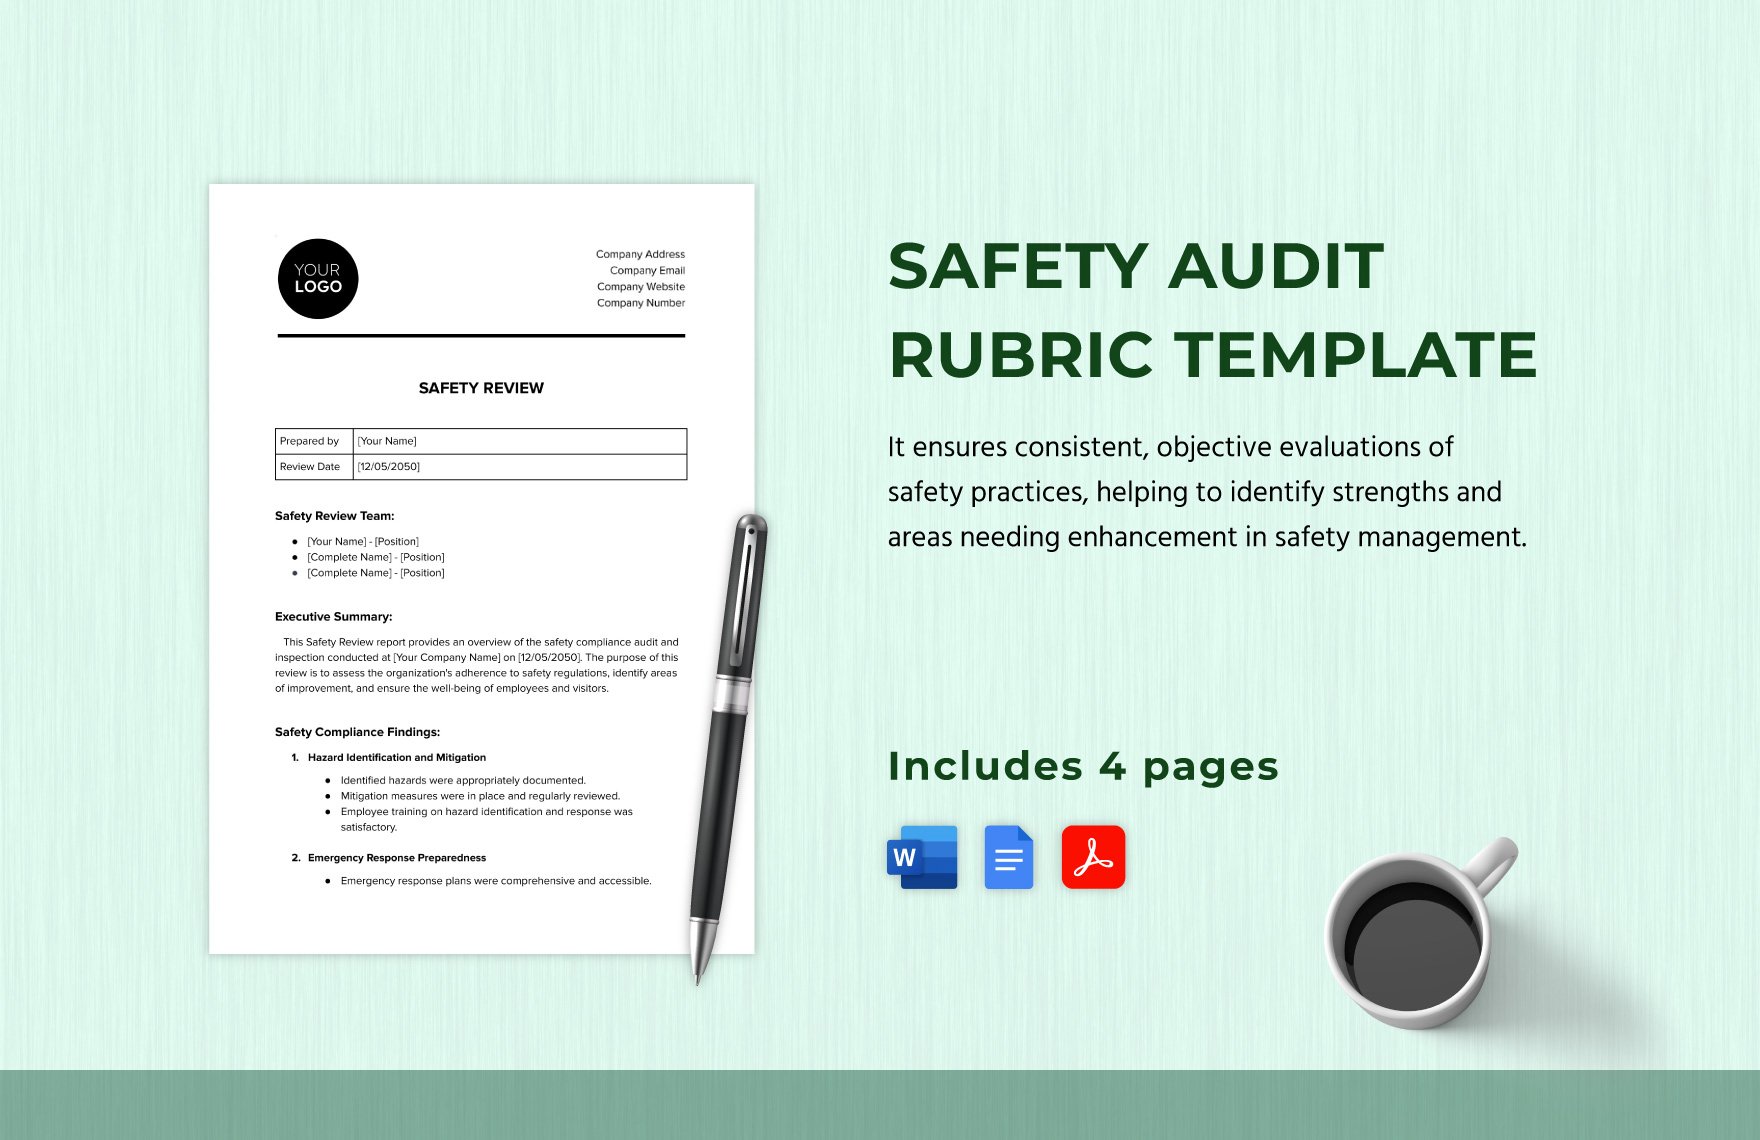 Safety Audit Rubric Template in Word, Google Docs, PDF